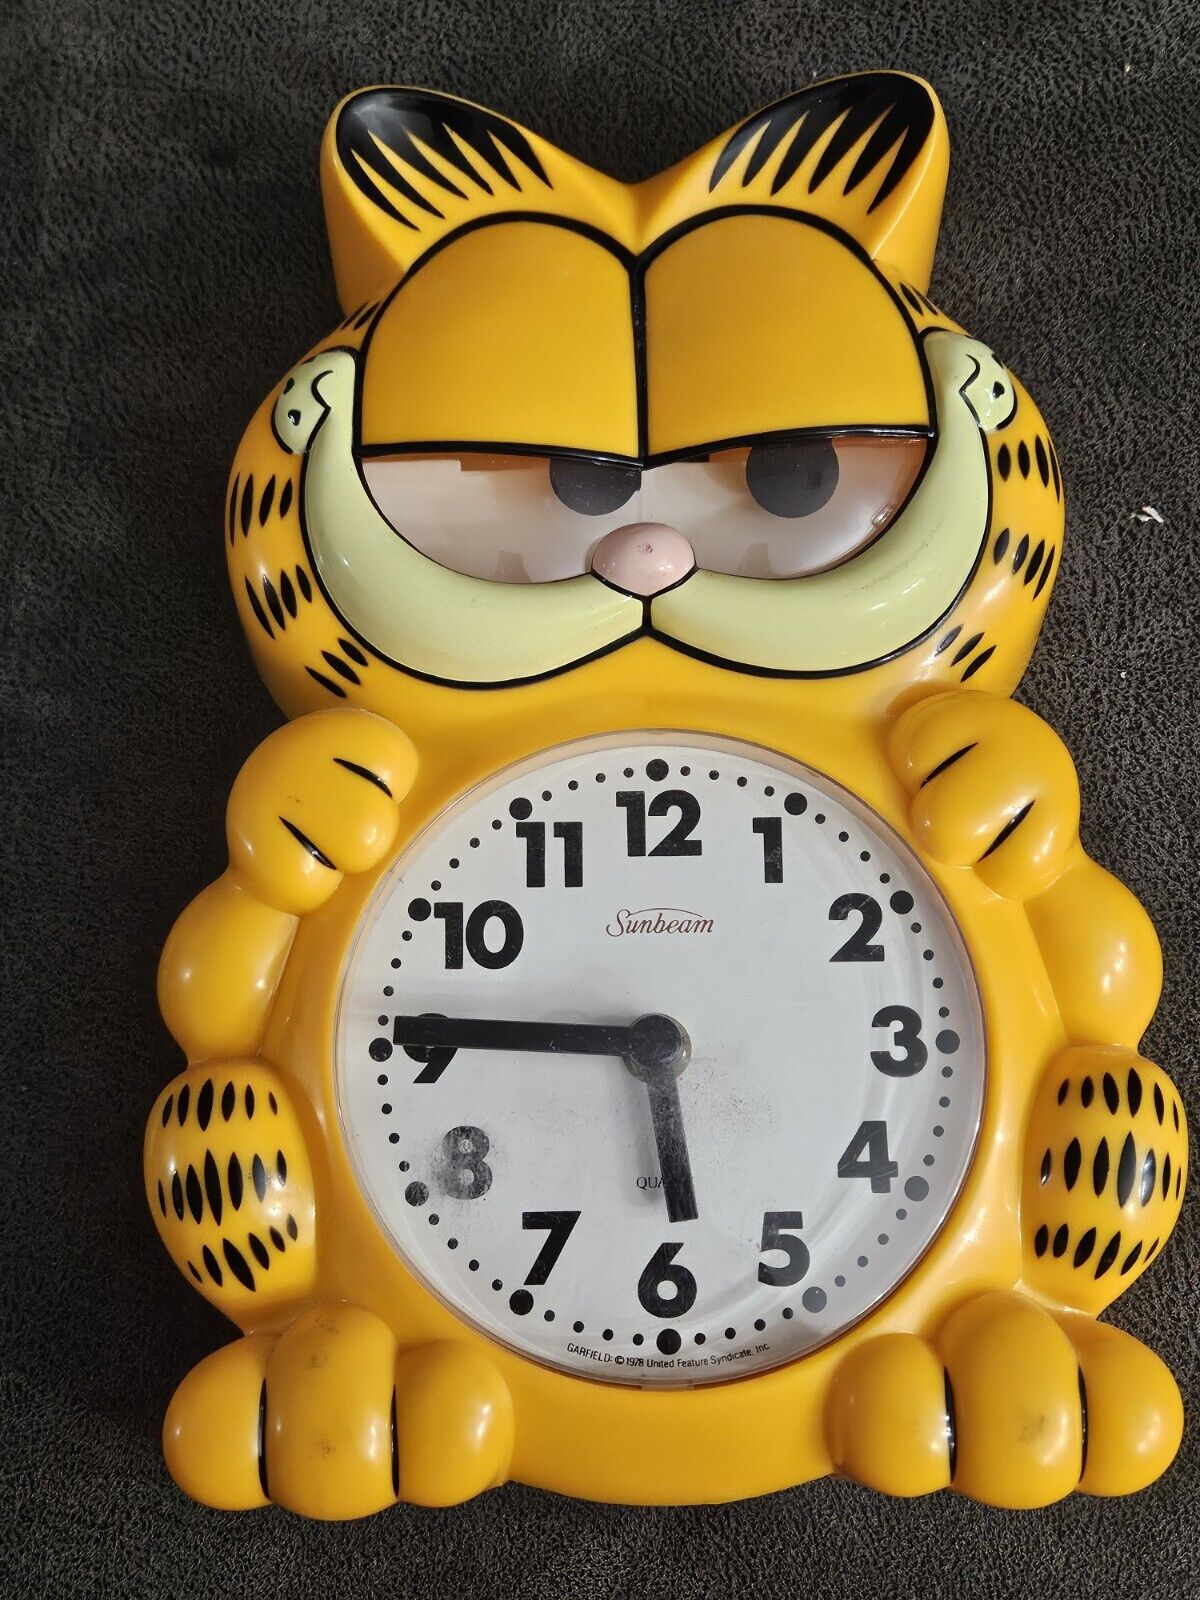 Vintage 1978 1981 Garfield The Cat Sunbeam wall clock. NOT WORKING Missing Tail 